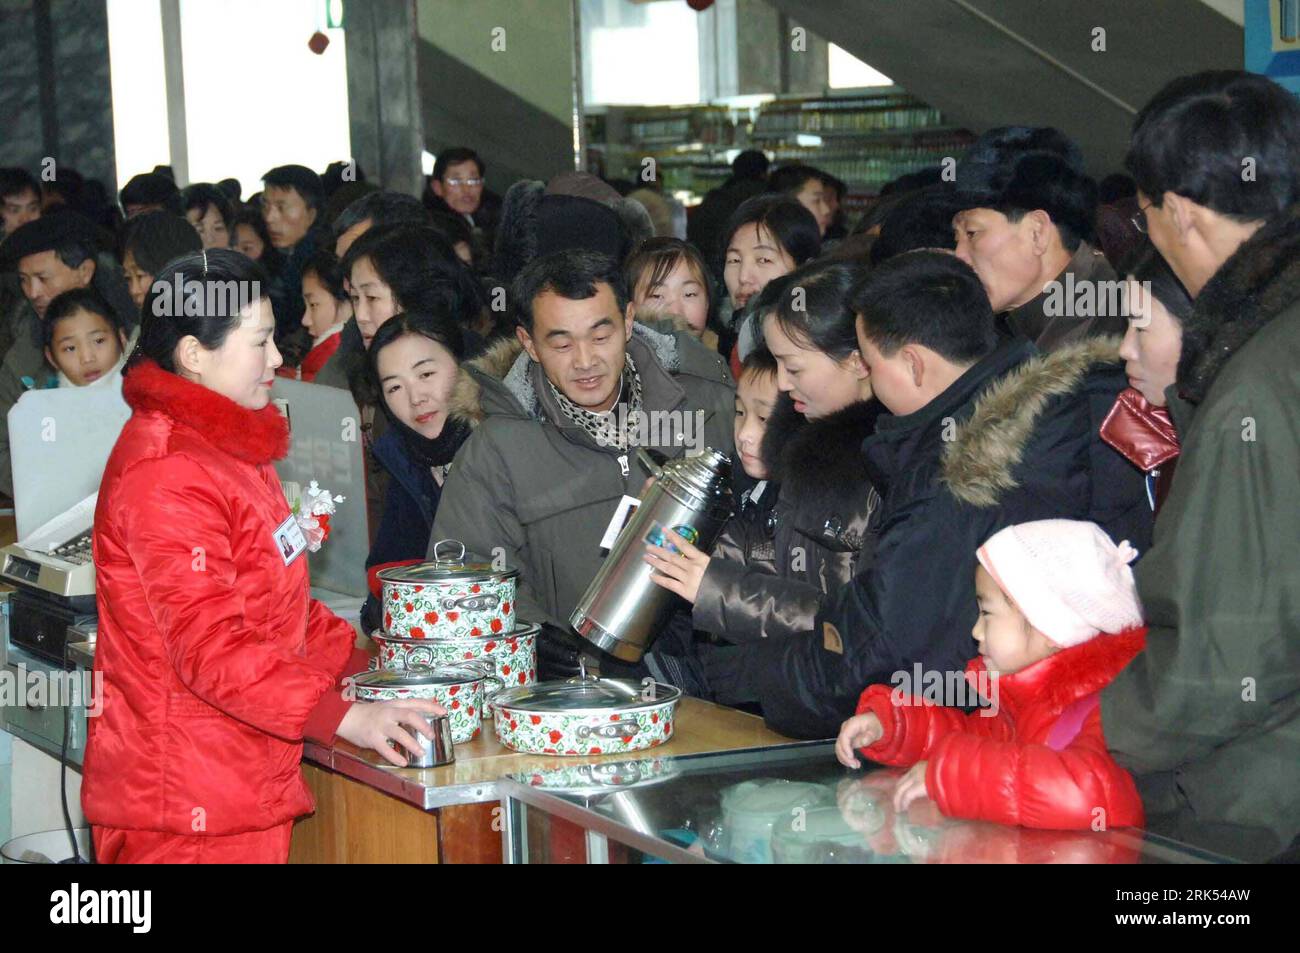 Bildnummer: 53693465  Datum: 01.01.2010  Copyright: imago/Xinhua (100101) -- PYONGYANG, Jan. 1, 2010 (Xinhua) -- Service staffs provide and other commodities to citizens during the new year time in Pyongyang in this picture released by Korean Central News Agency (KCNA) on Jan. 1, 2010. (Xinhua/KCNA) (cy) (1)DPRK-PYONGYANG-NEW YEAR PUBLICATIONxNOTxINxCHN Silvester Neujahr neues Jahr Jahreswechsel kbdig xcb 2010 quer    Bildnummer 53693465 Date 01 01 2010 Copyright Imago XINHUA  Pyongyang Jan 1 2010 XINHUA Service staffs provide and Other Commodities to Citizens during The New Year Time in Pyong Stock Photo